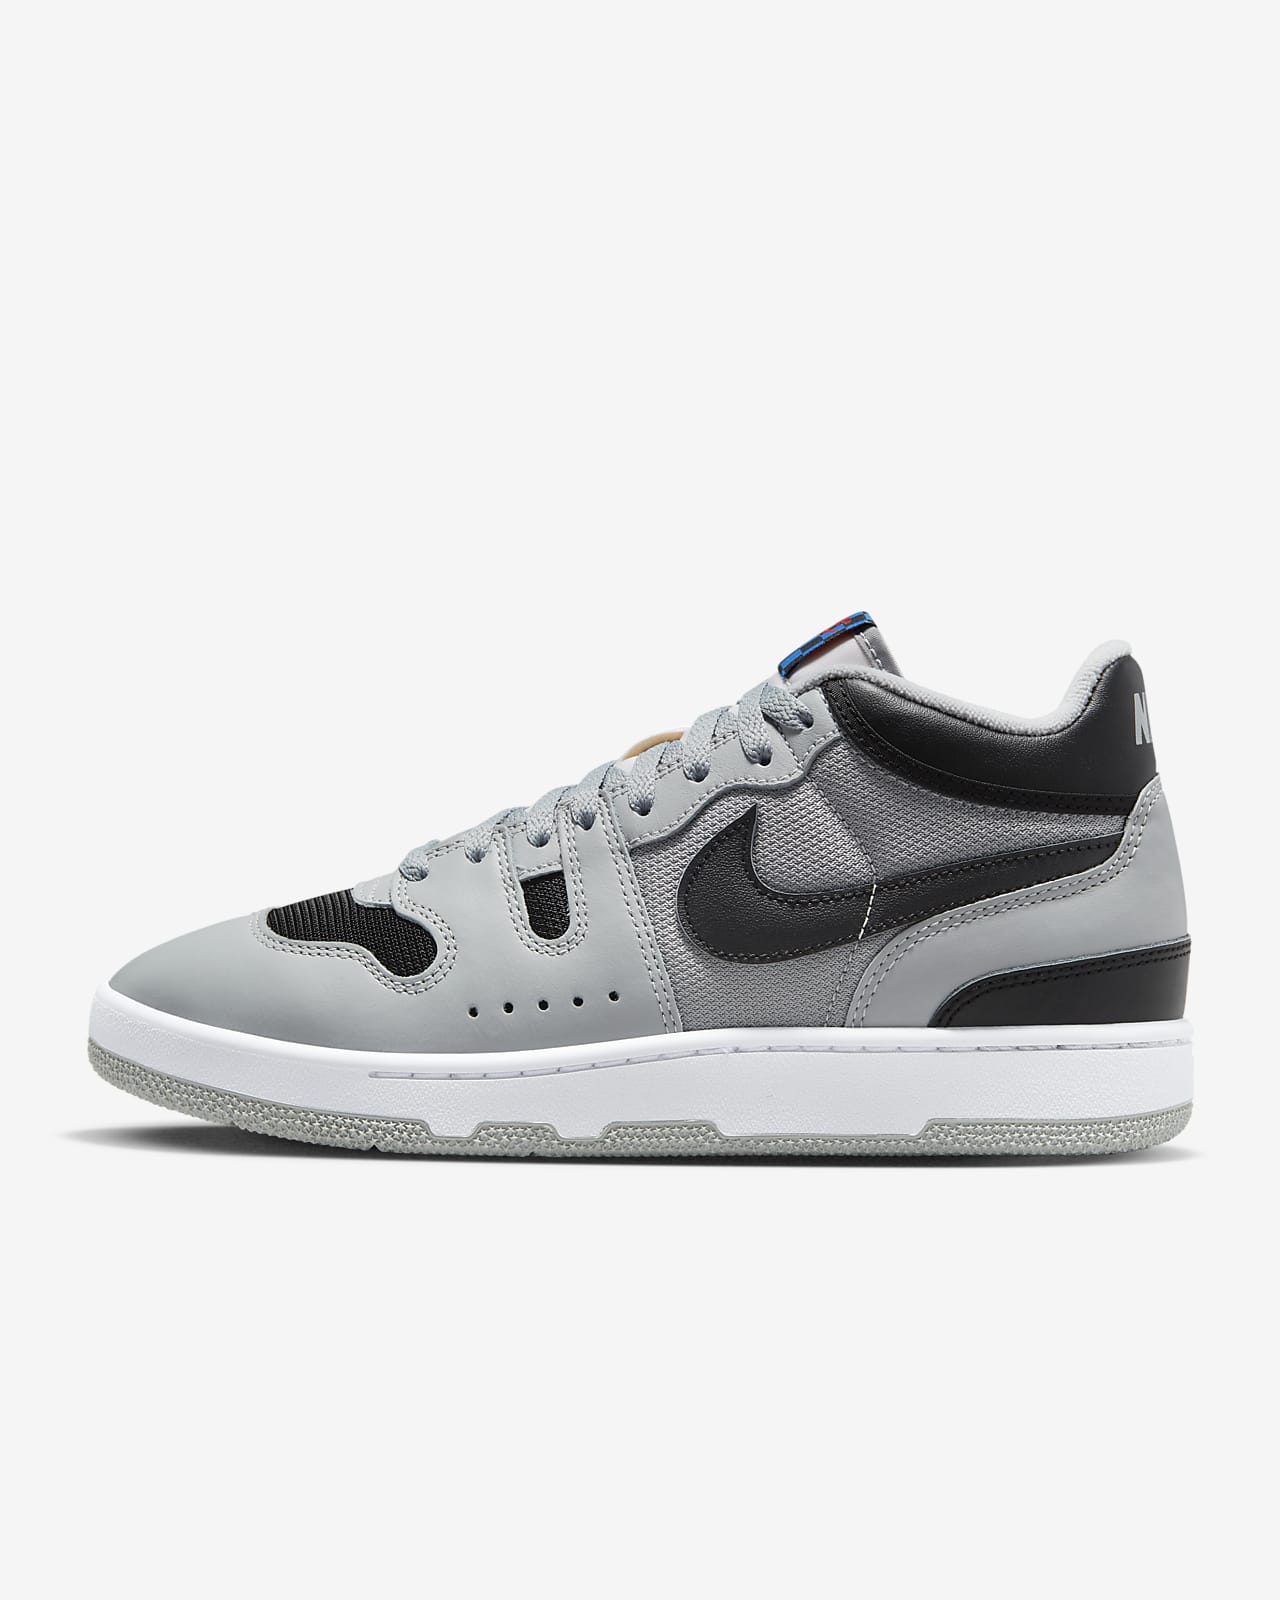 Chaussure Nike Attack pour homme